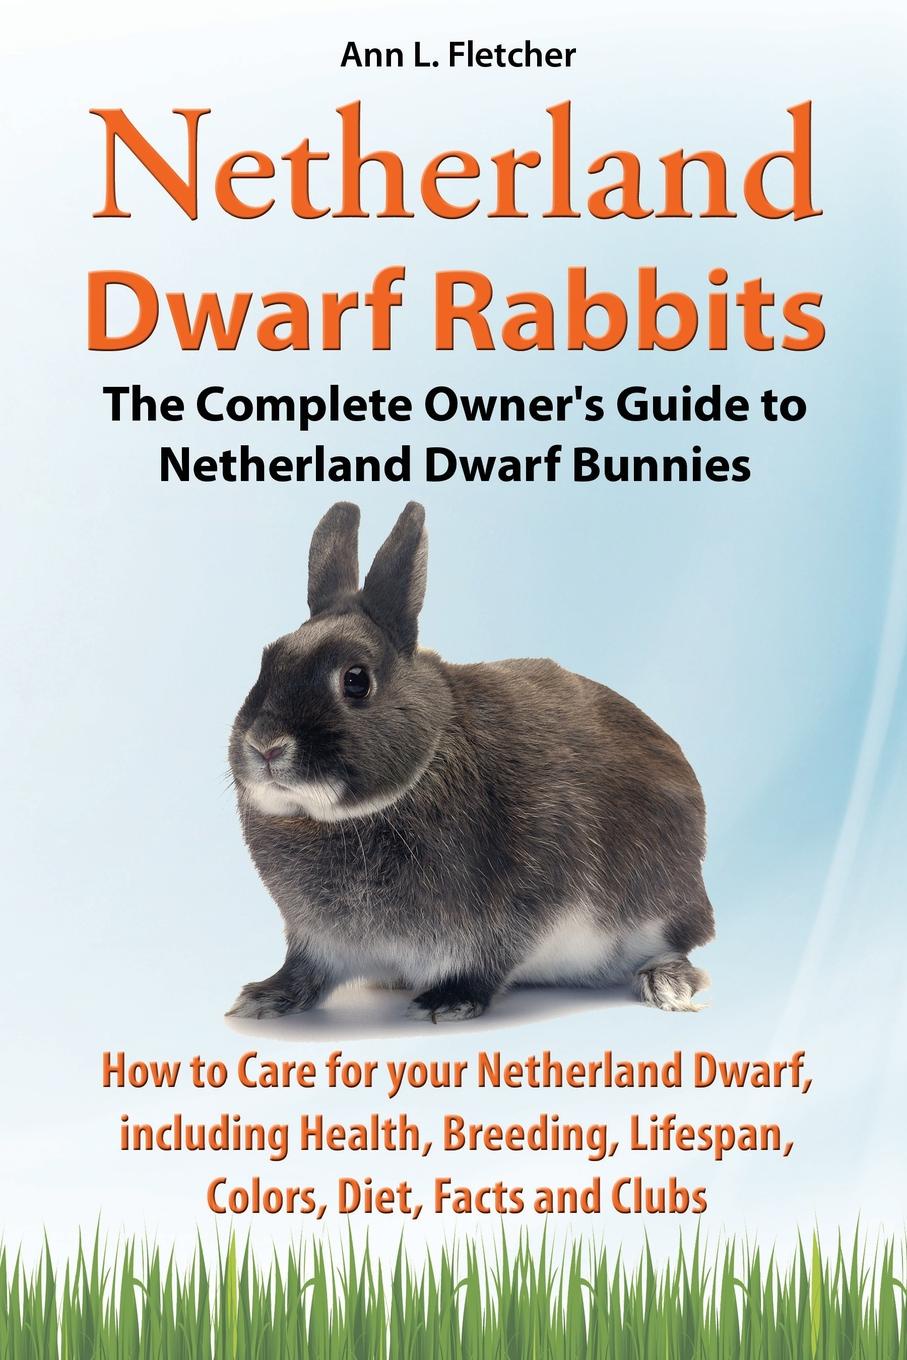 Netherland Dwarf Rabbits, The Complete Owner`s Guide to Netherland Dwarf Bunnies, How to Care for your Netherland Dwarf, including Health, Breeding, Lifespan, Colors, Diet, Facts and Clubs